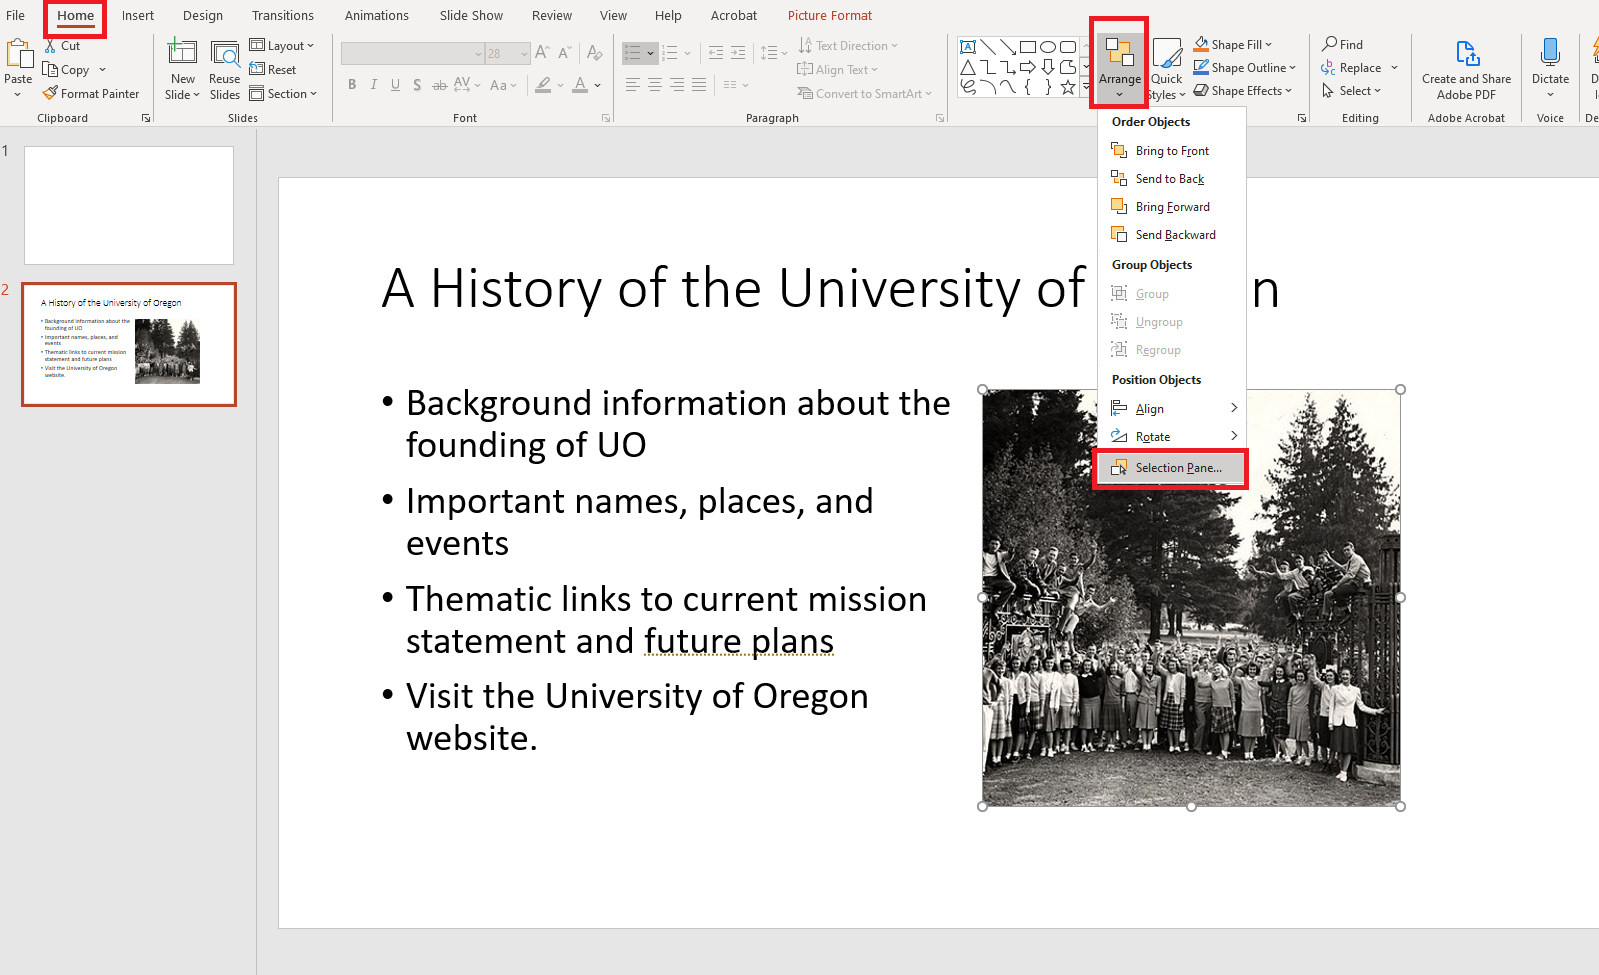 How to select the reading order pane in MS PowerPoint